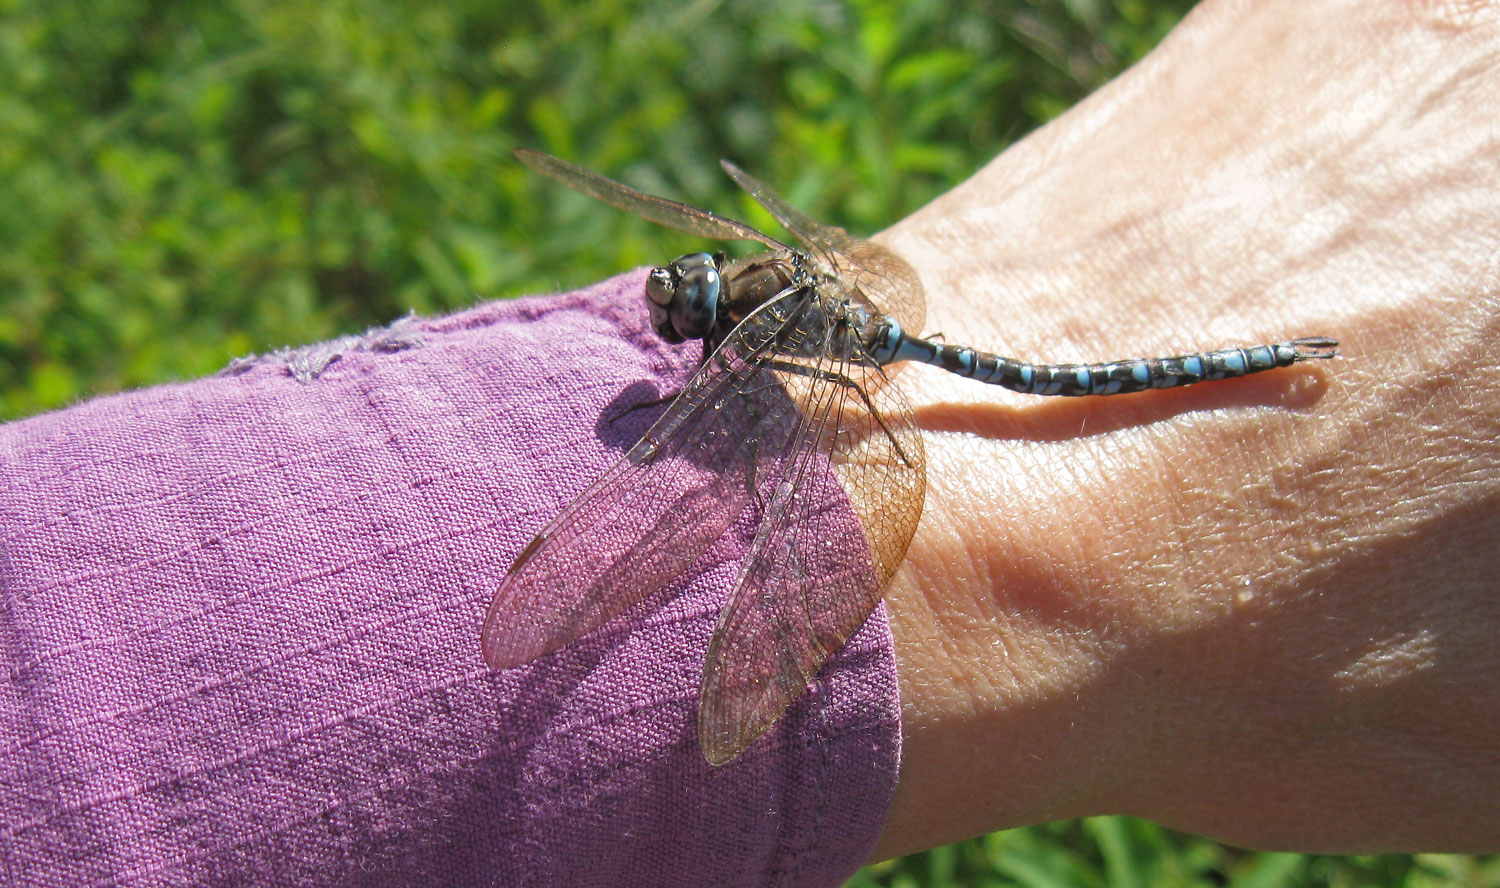 Darner dragonfly stopping by for a visit.